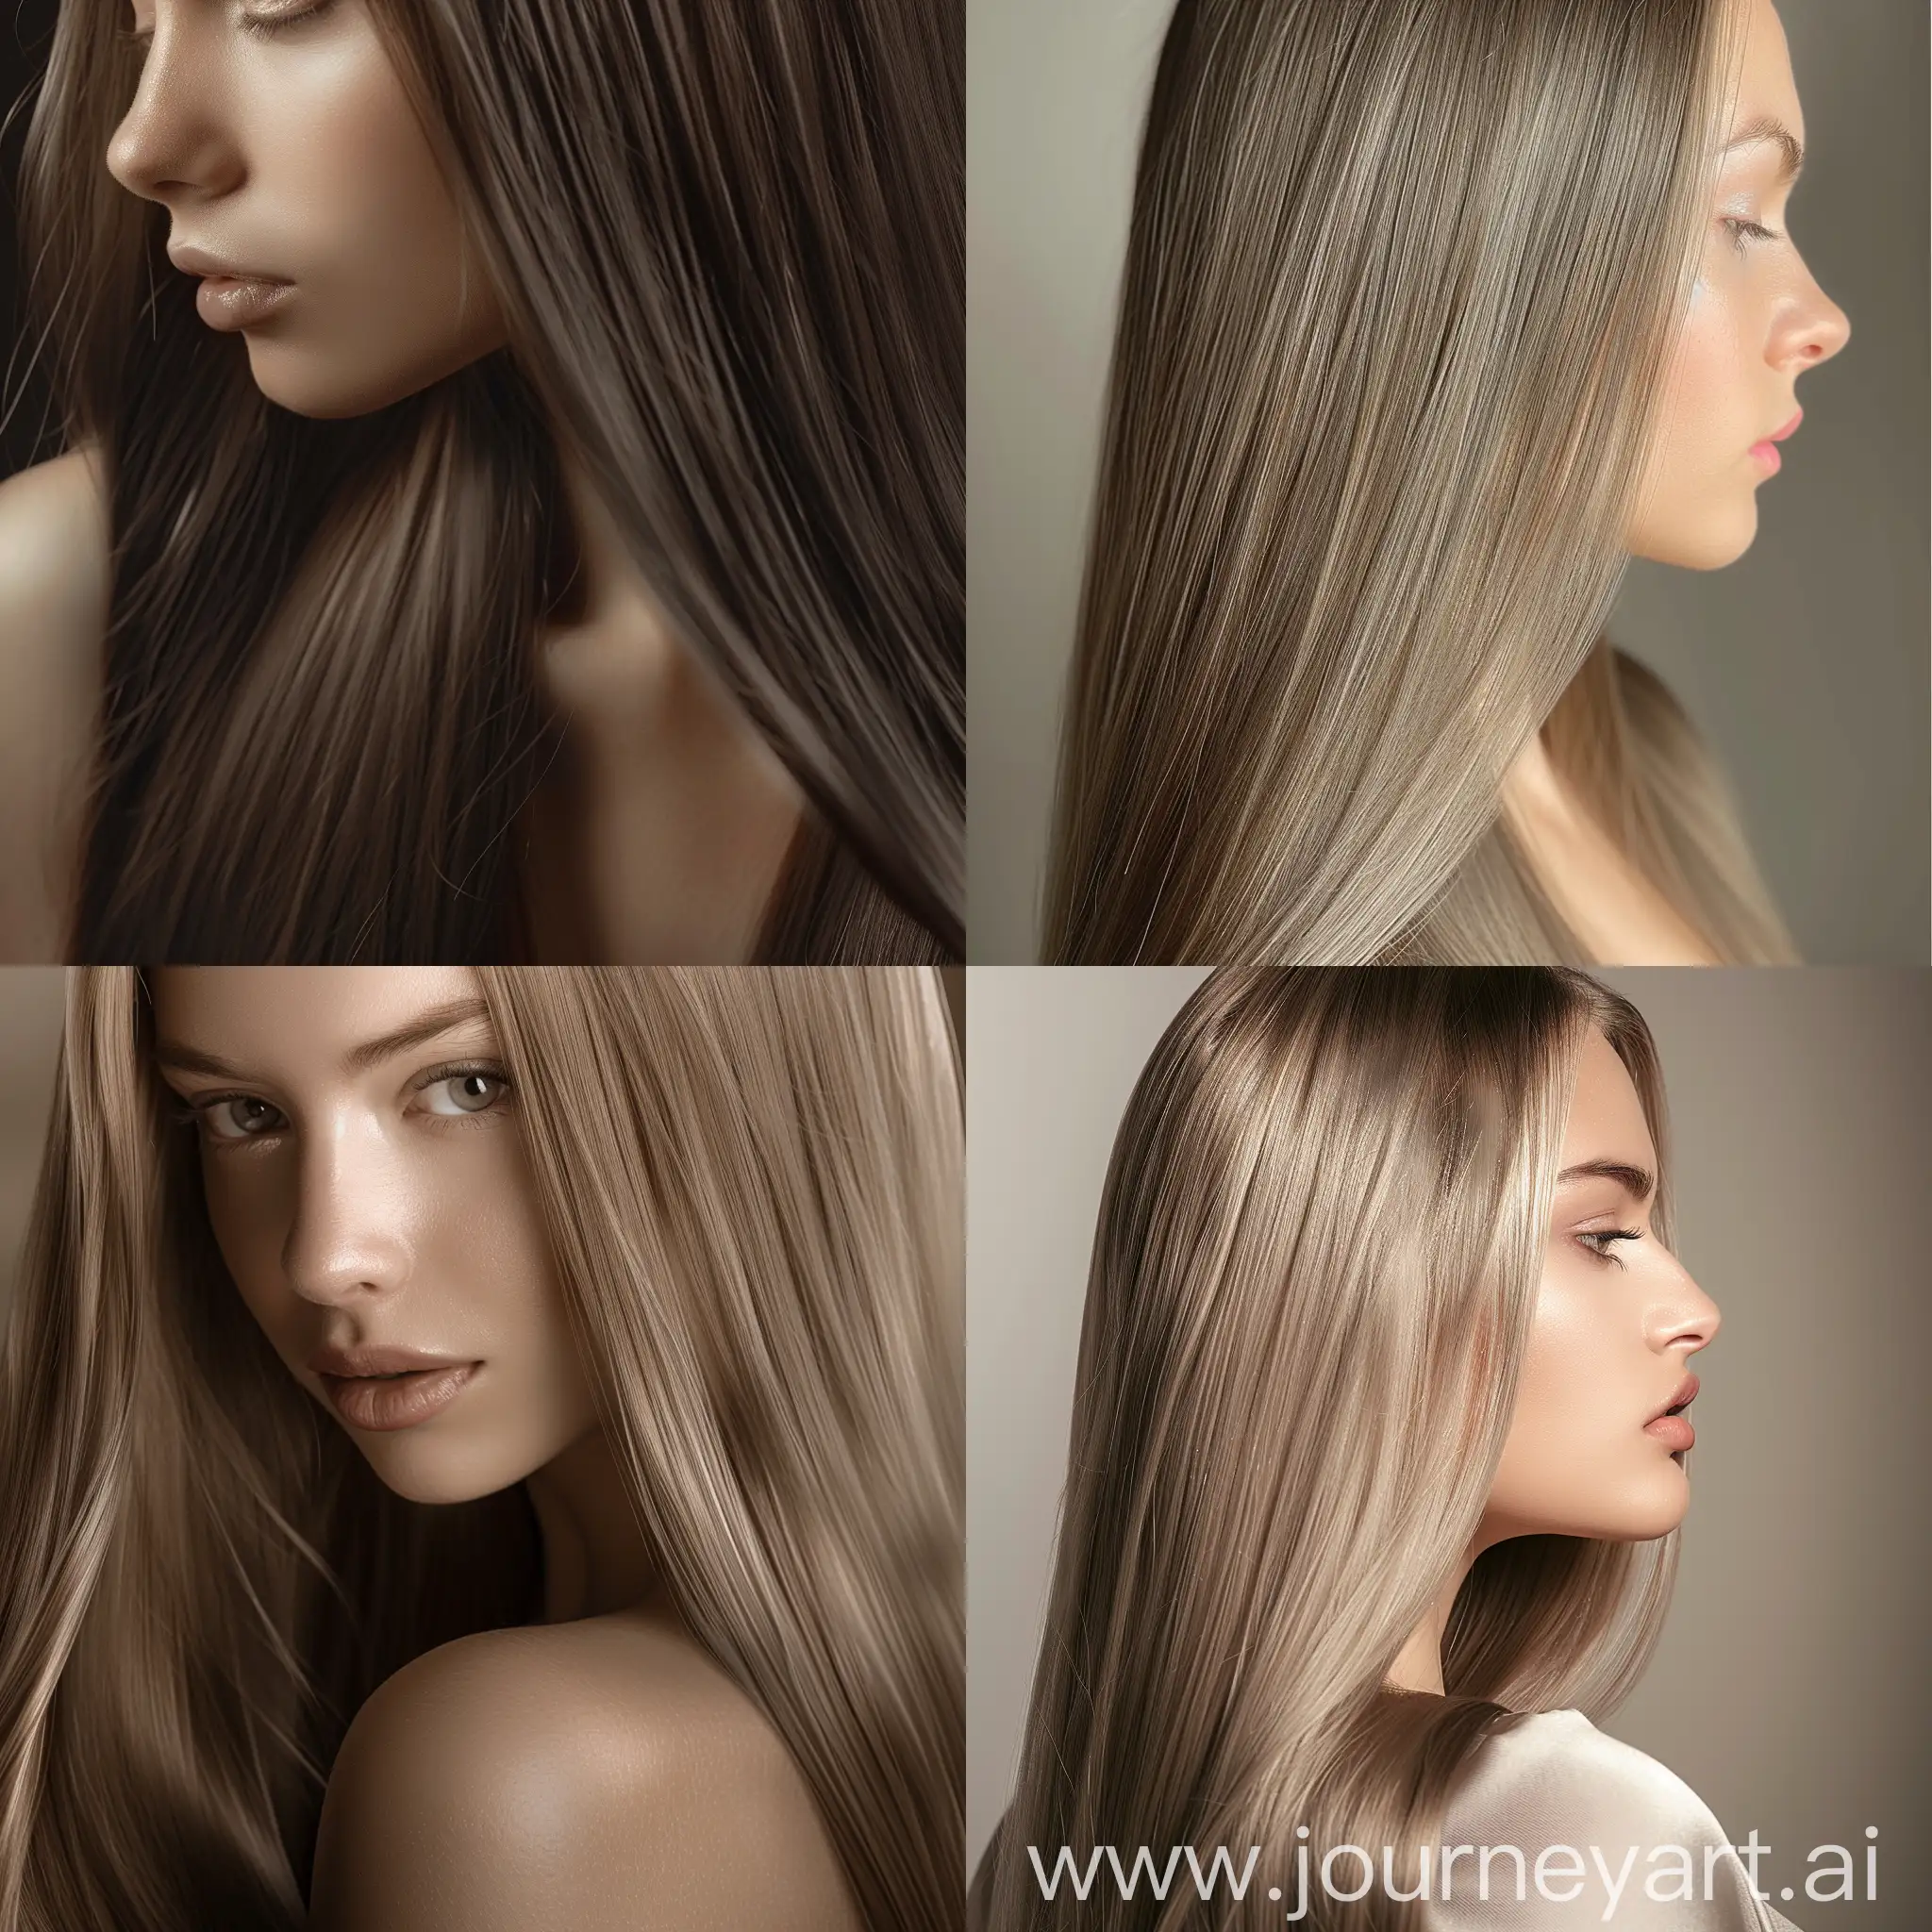 Create a detailed, close-up photograph of a woman with long, straight hair, emphasizing the hairstyle's elegance and perfection. The lighting should enhance the hair's natural sheen and texture, drawing the viewer's attention to the hair's healthy appearance and styling. A neutral background is preferred to ensure the hairstyle is the focal point. The image should capture the hairstyle's beauty and simplicity, making it the standout feature that inspires site visitors.

